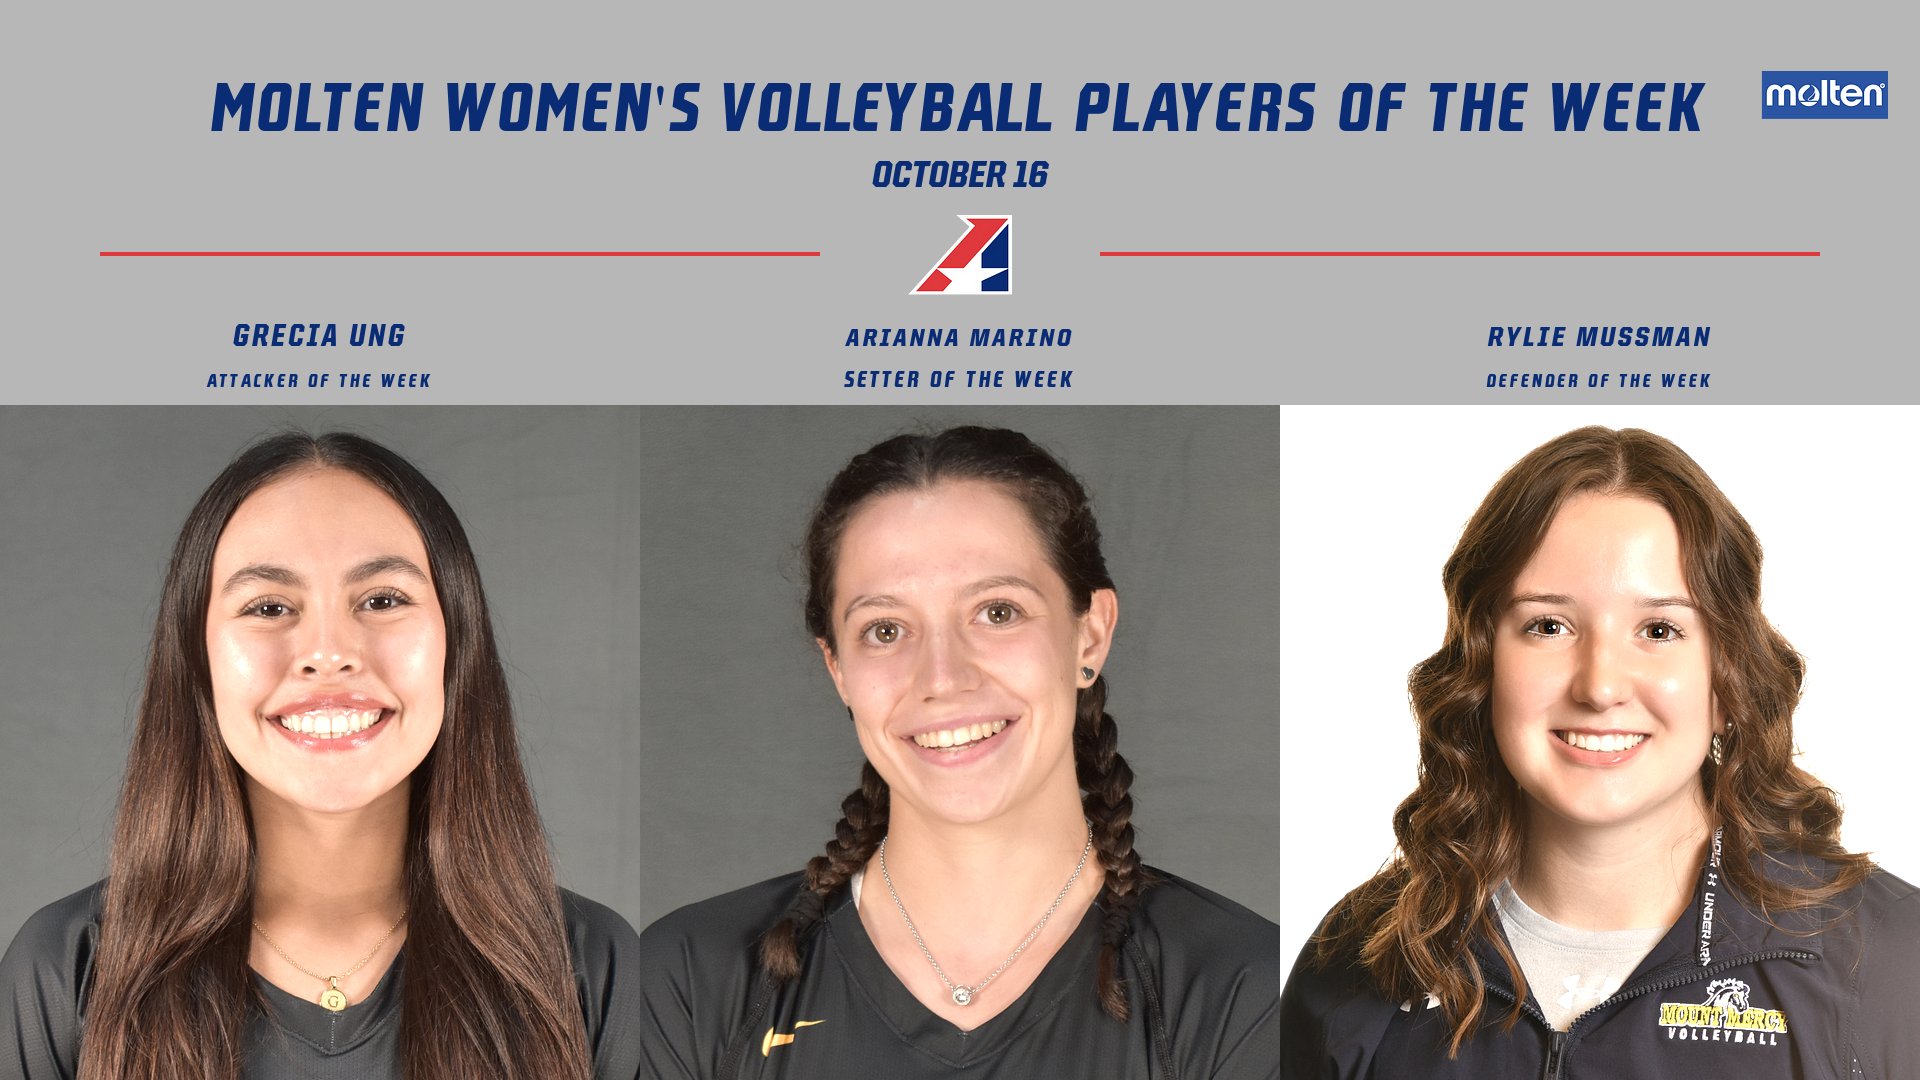 Molten Women’s Volleyball Players of the Week Announced – October 16